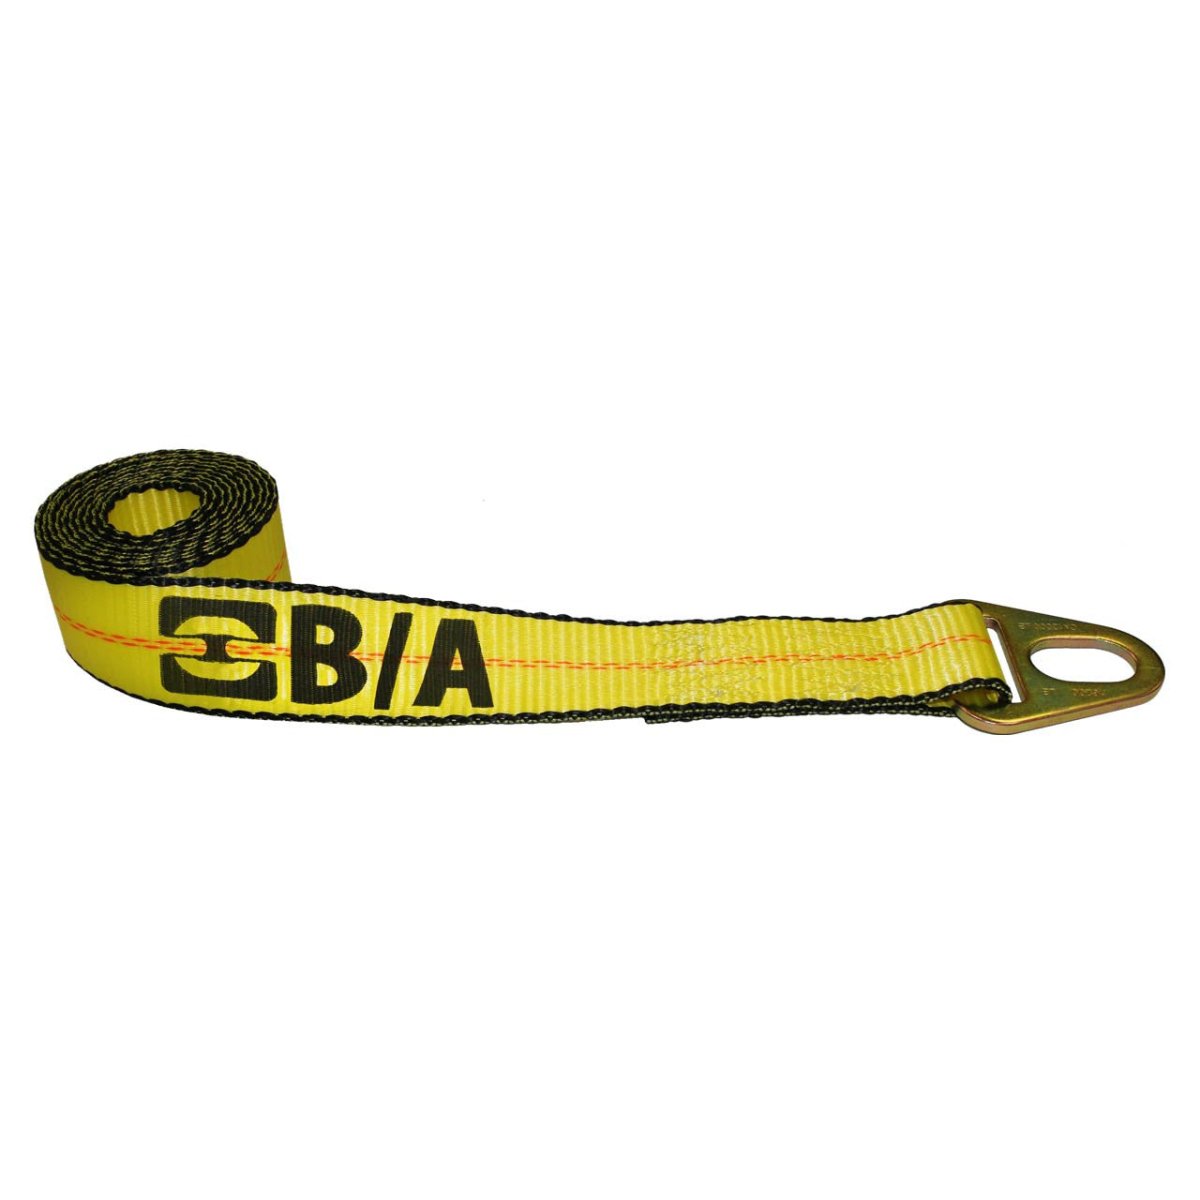 B/A Products Co. 2" x 8' Wheel Lift Strap w/Grab Plate - 38-1A - starequipmentsales